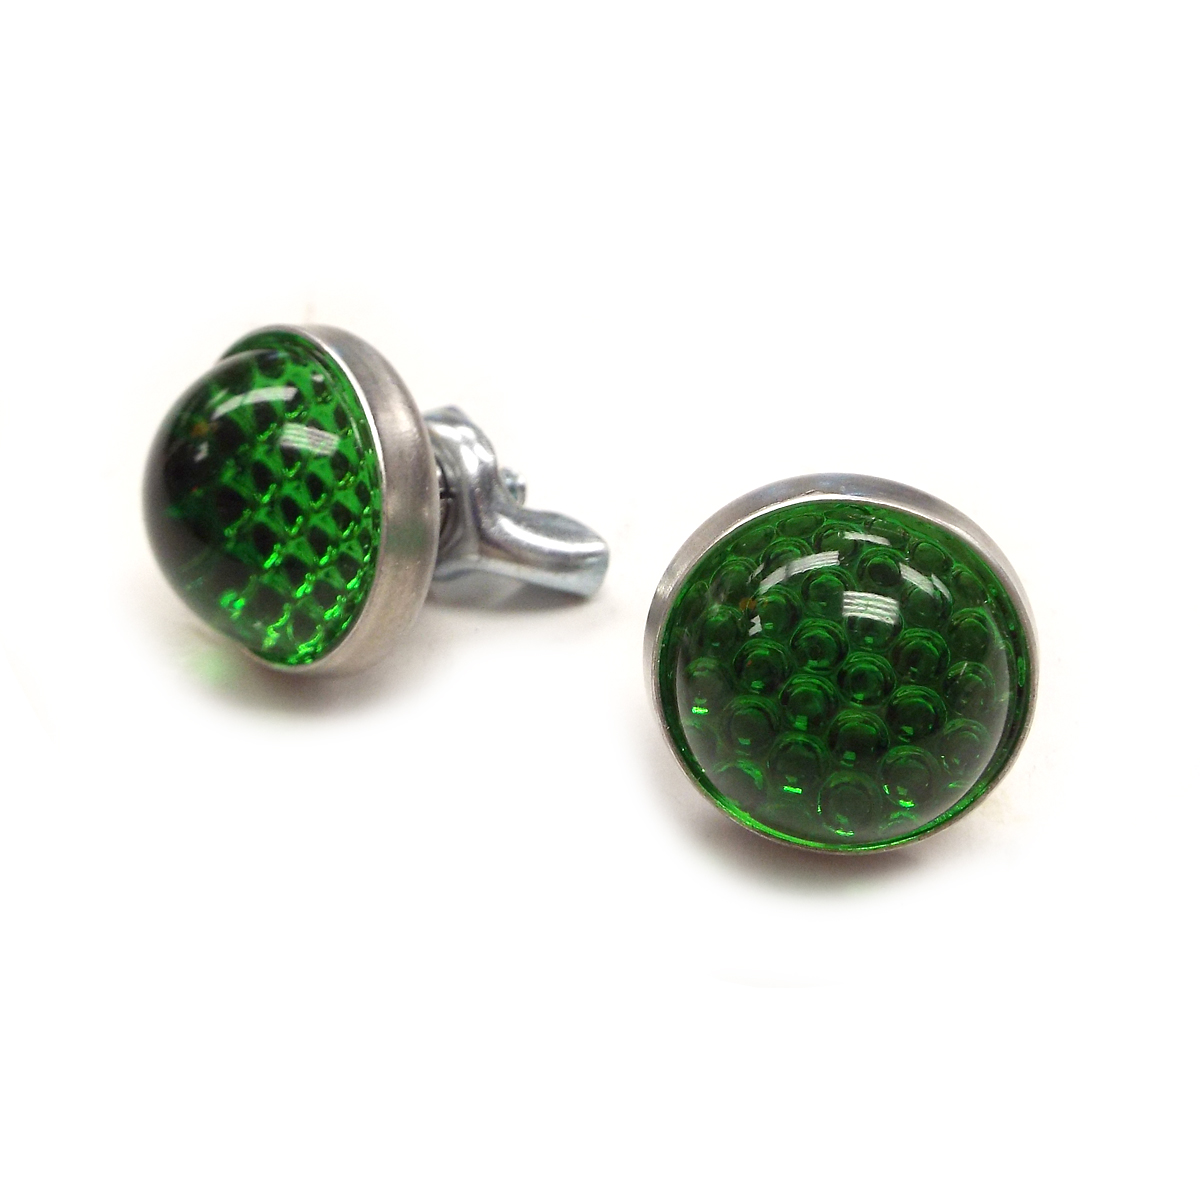 Reflector License Plate Fasteners Green Glass Reflective Jewels Chevrolet and GMC Pickup Truck